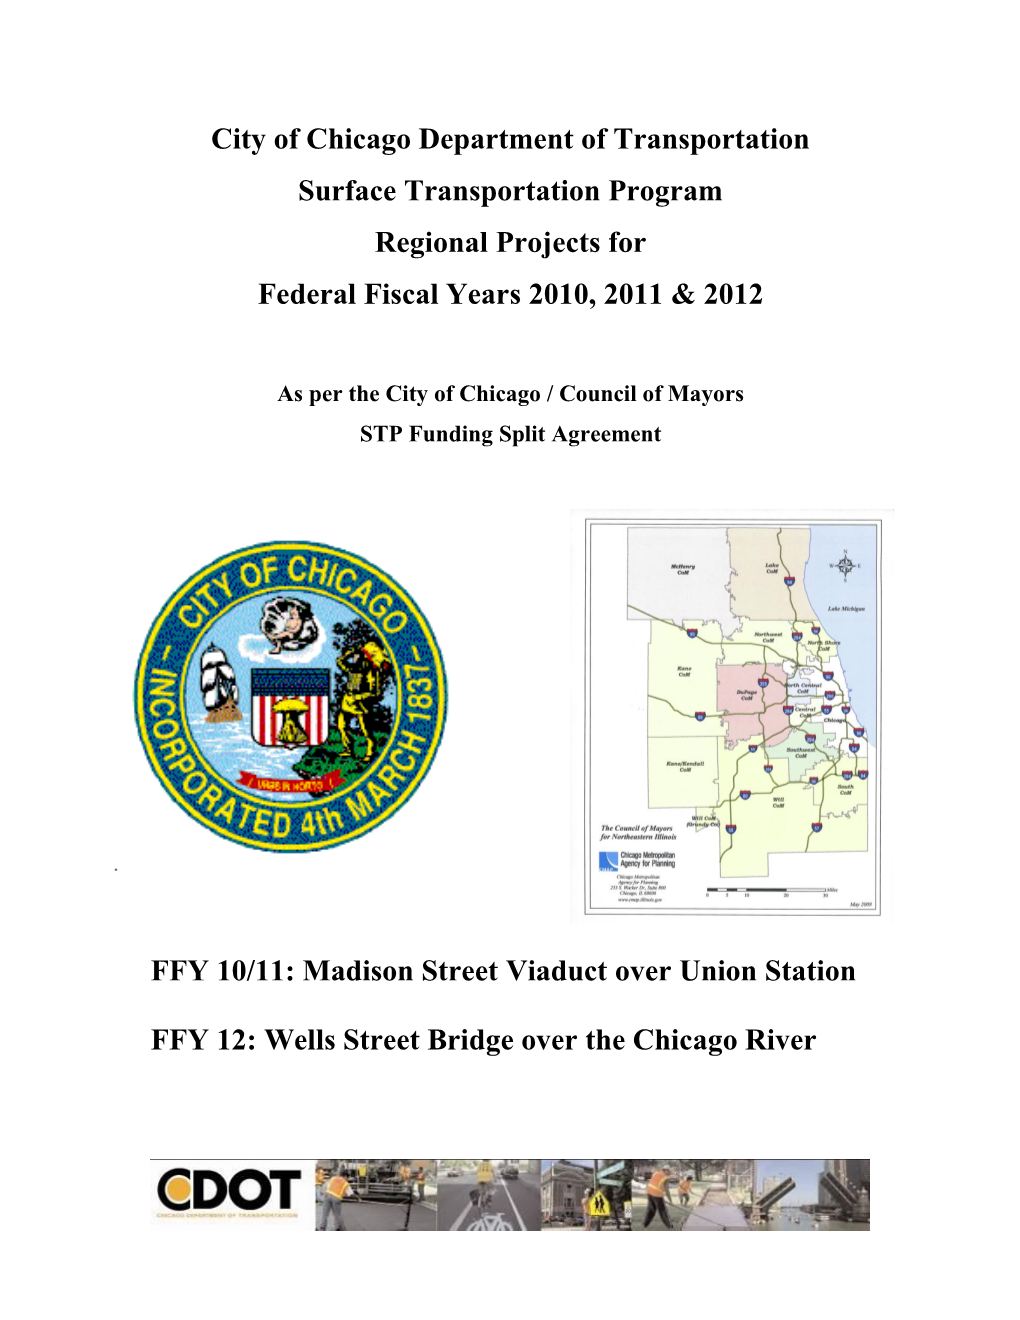 City of Chicago Department of Transportation Surface Transportation Program Regional Projects for Federal Fiscal Years 2010, 2011 & 2012